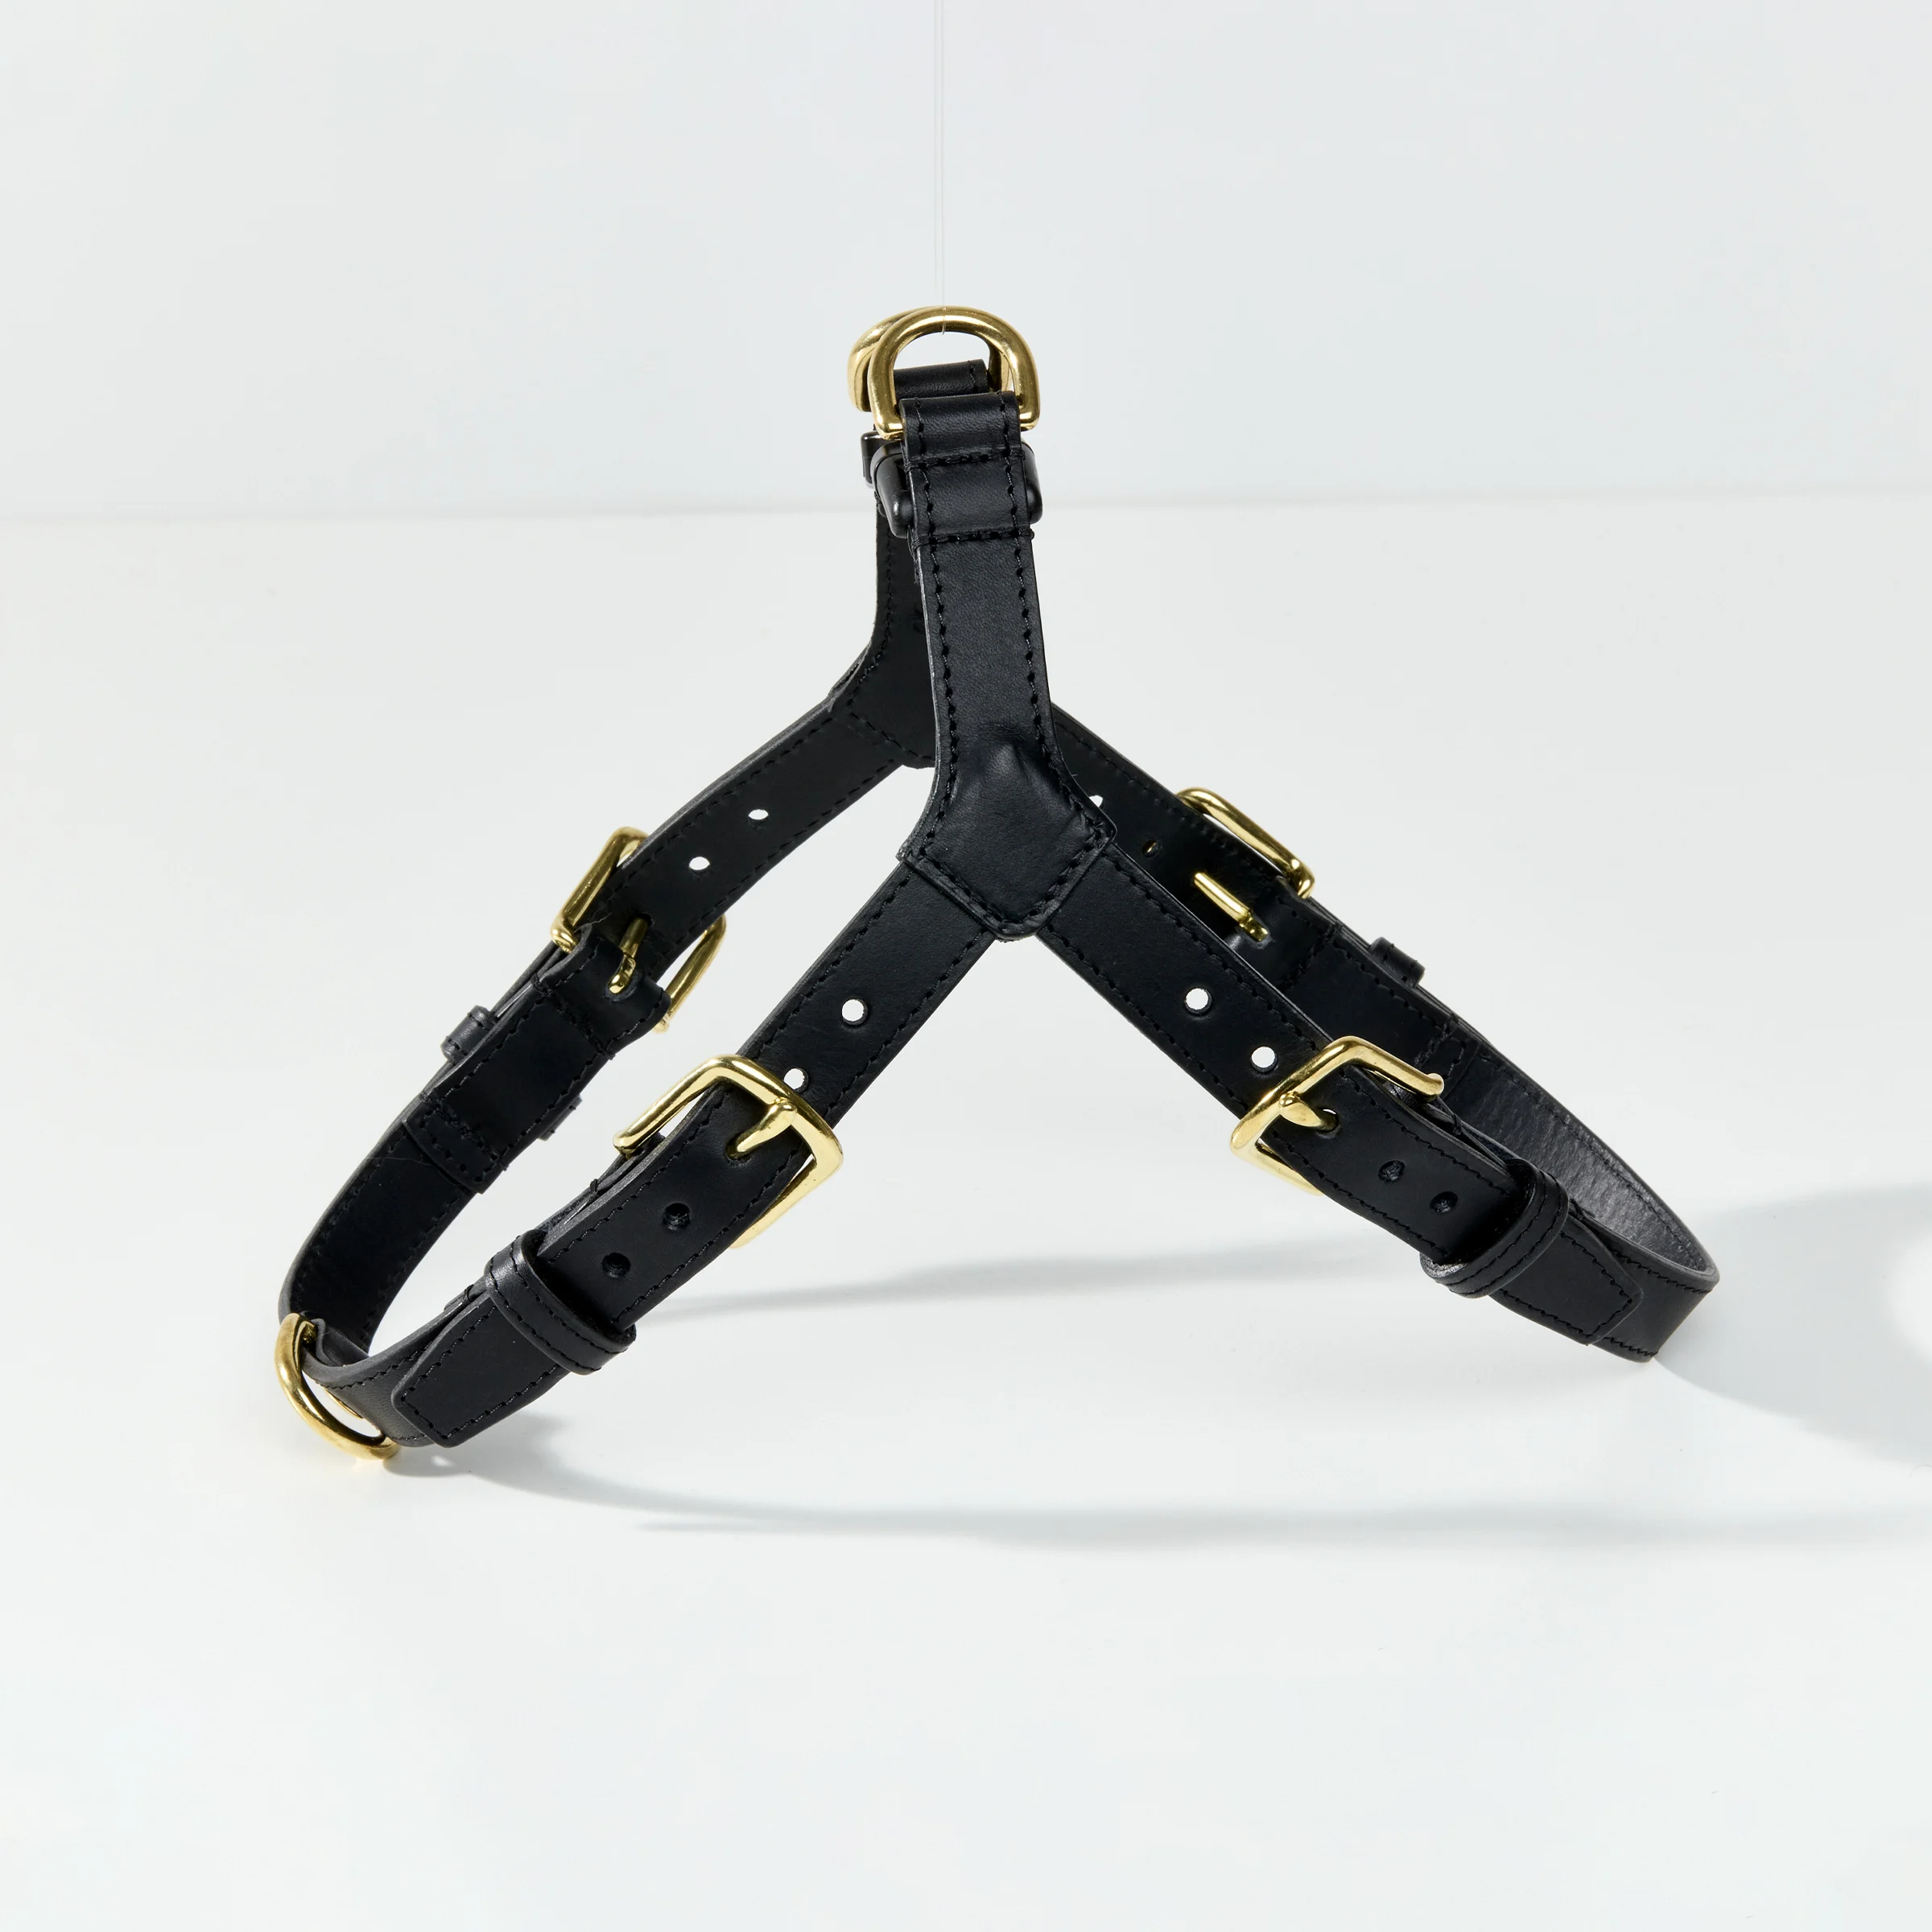 One-click Leather Dog Harness (Black)